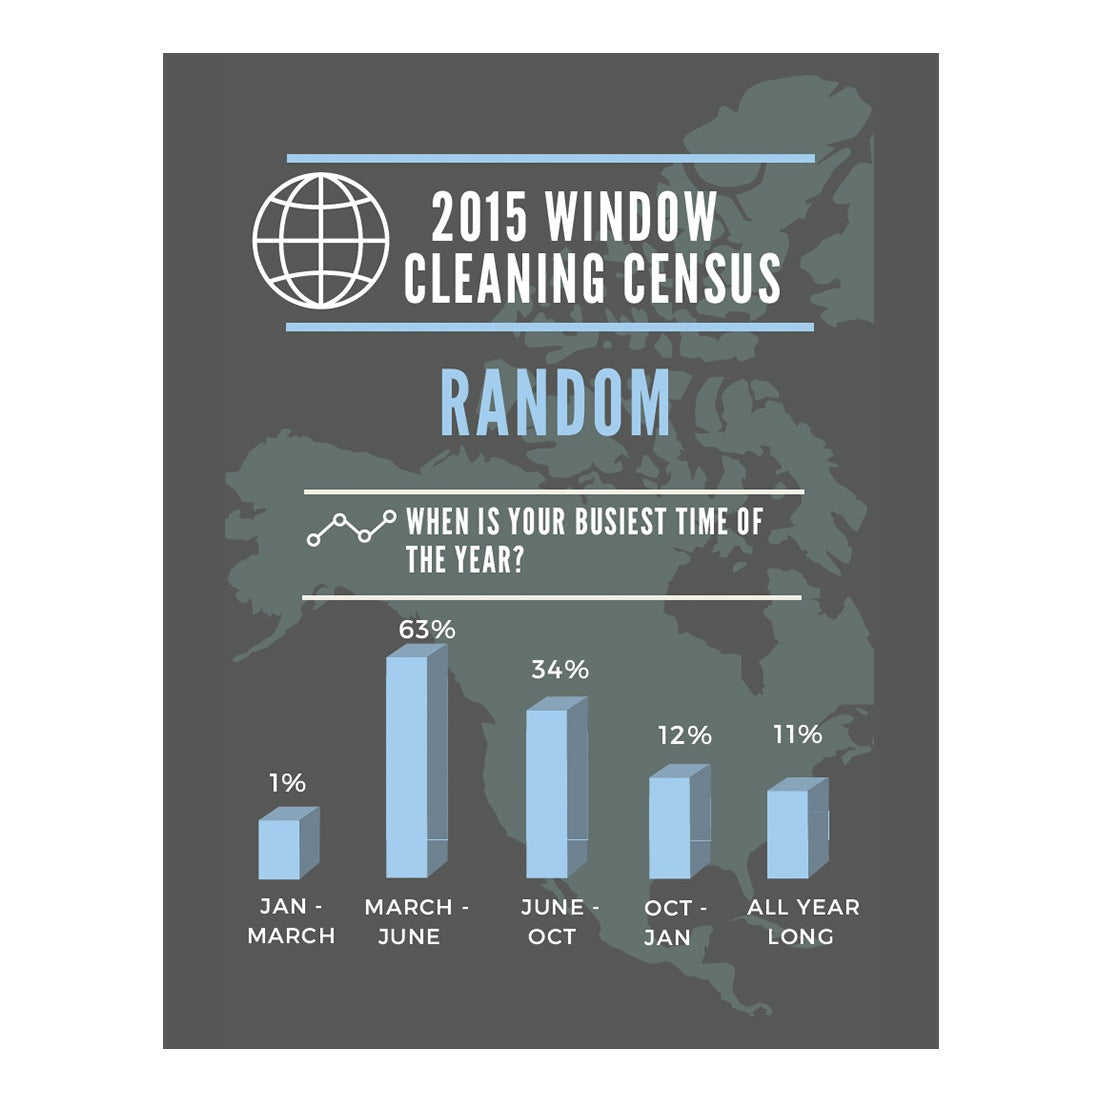 2015 Window Cleaning Census Random Facts